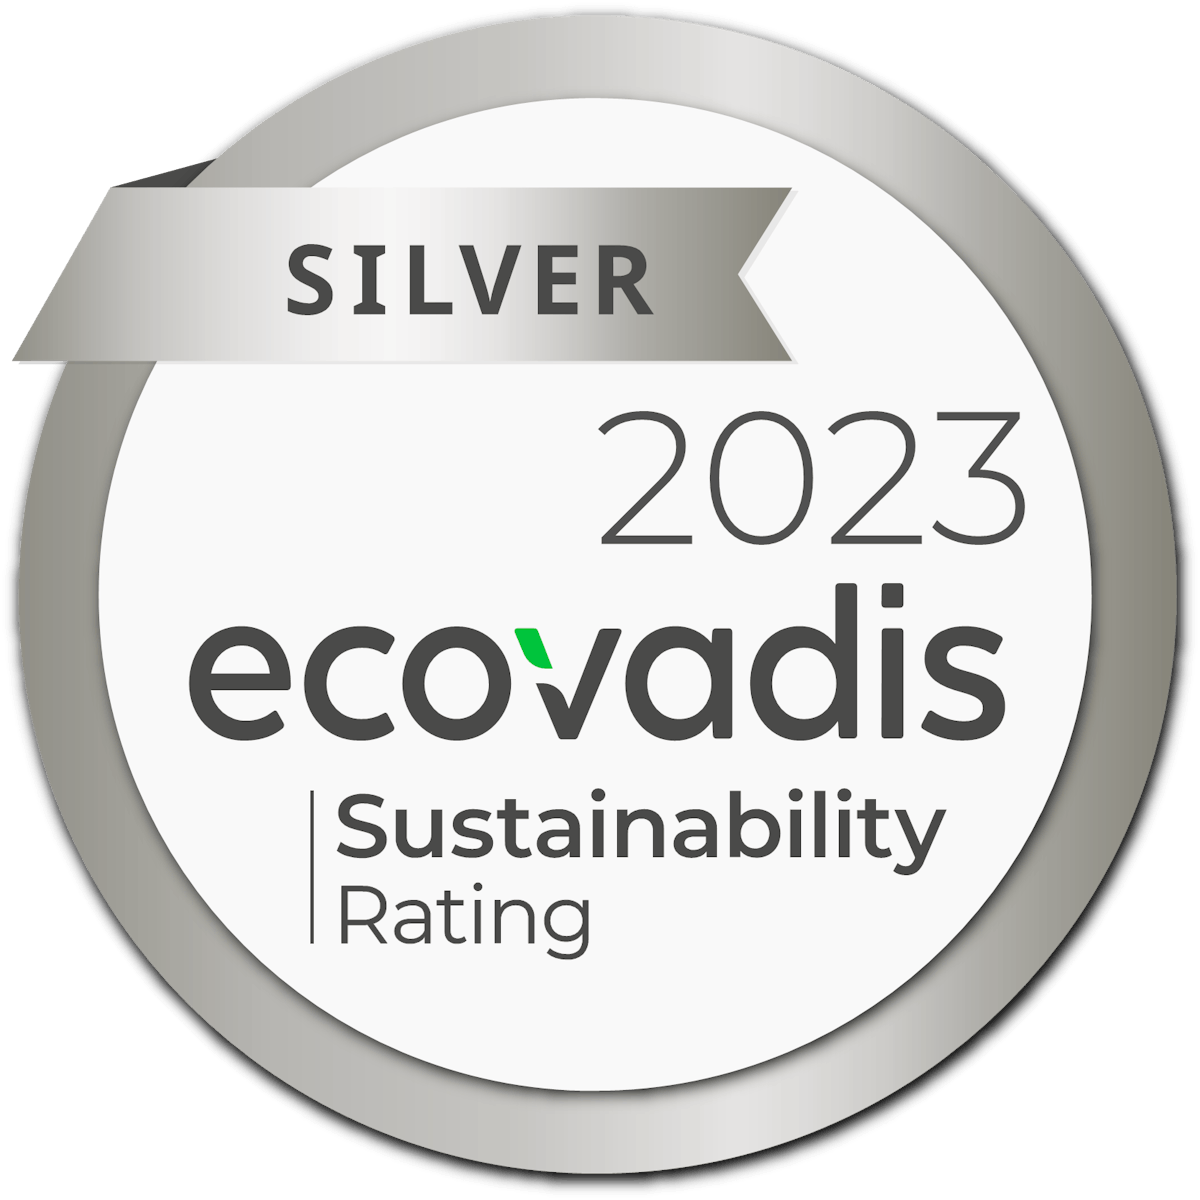 Tridonic has been awarded the EcoVadis Silver Medal for sustainability activities. Its overall rating places Tridonic in the top four percent of companies in the lighting industry.